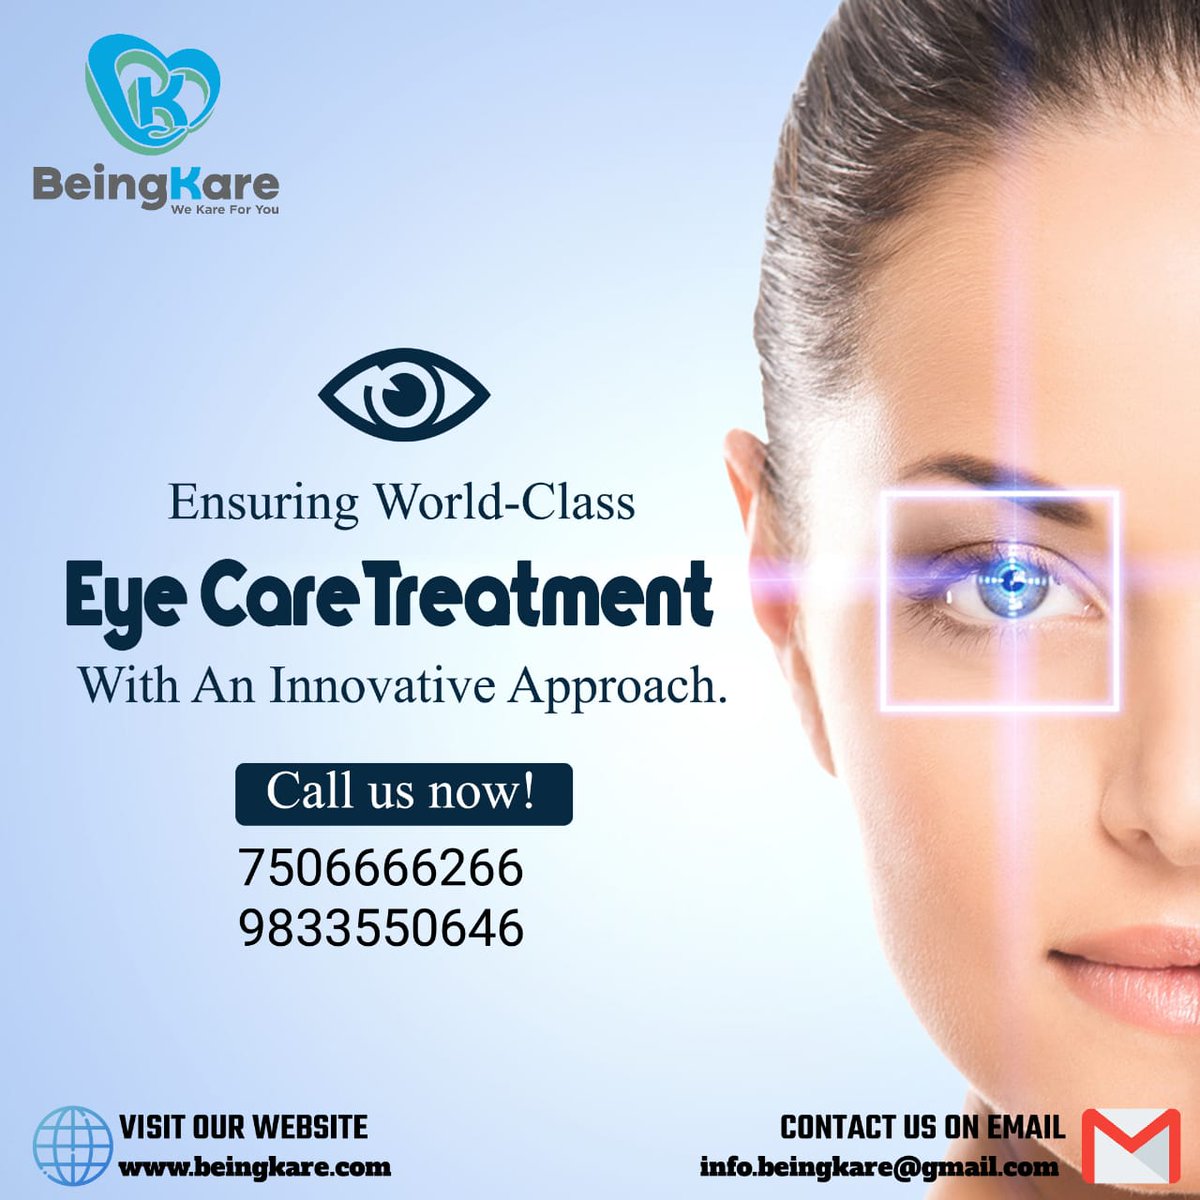 Cataract or LASIK surgery required? Confused about which doctor or hospital is best for you?We are there to Assist you.
Contact - 7506666266 / 7506666466  #BeingKare #hospital#eyecare #lasik #cataract #lasiktreatment #cataractsurgeon #lasiksurgeon #catractsurgery #lasikeyesurgery